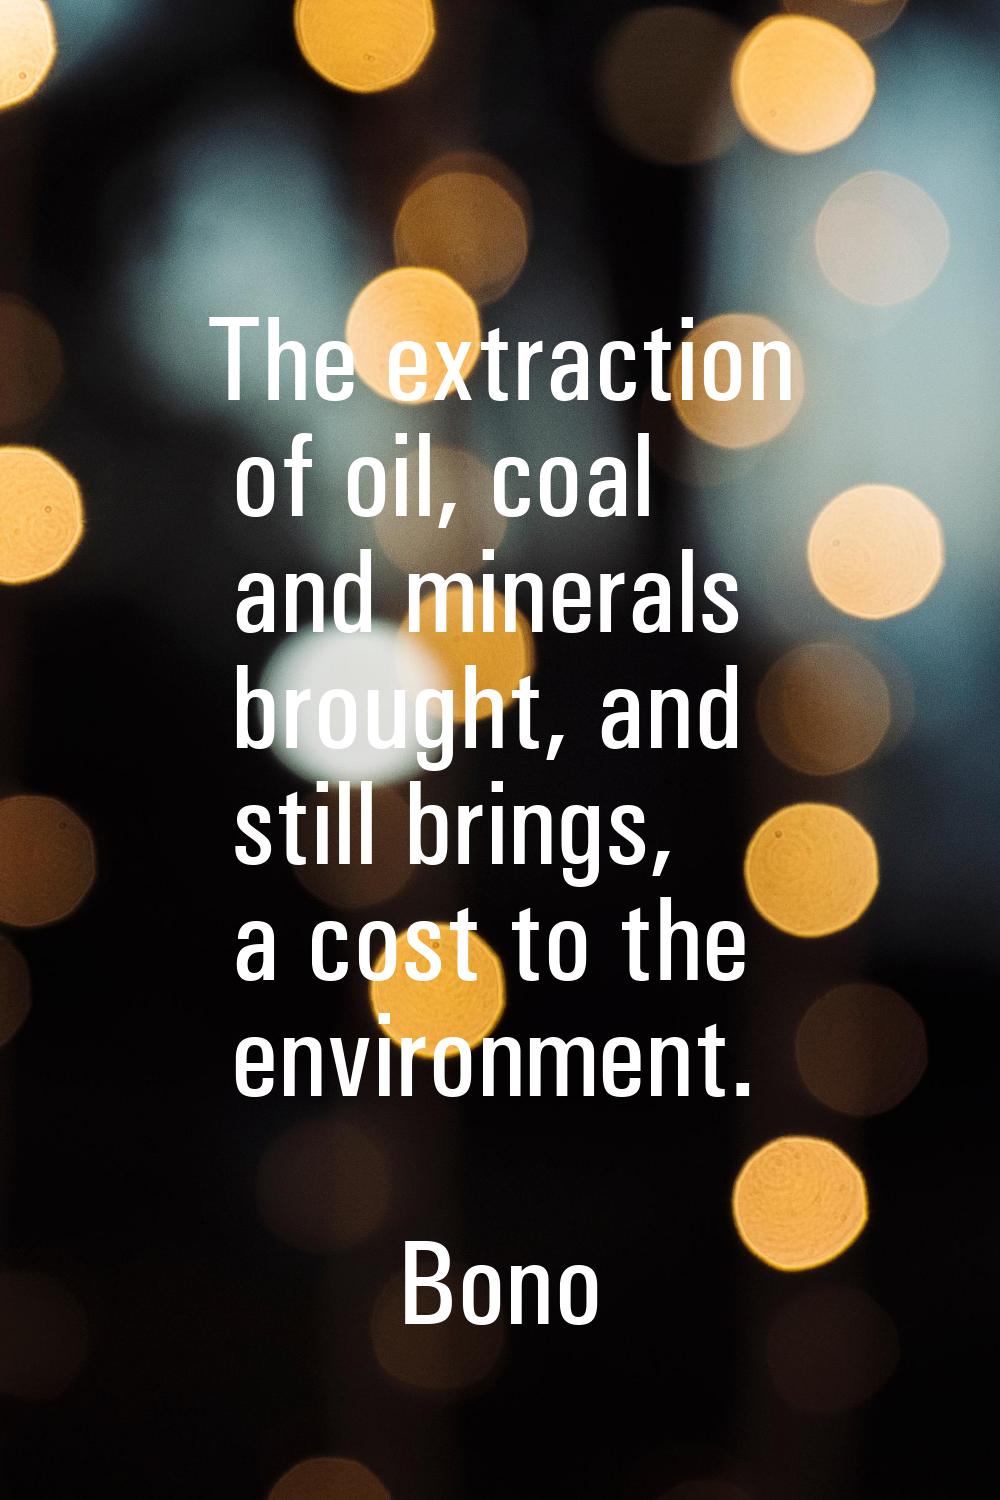 The extraction of oil, coal and minerals brought, and still brings, a cost to the environment.